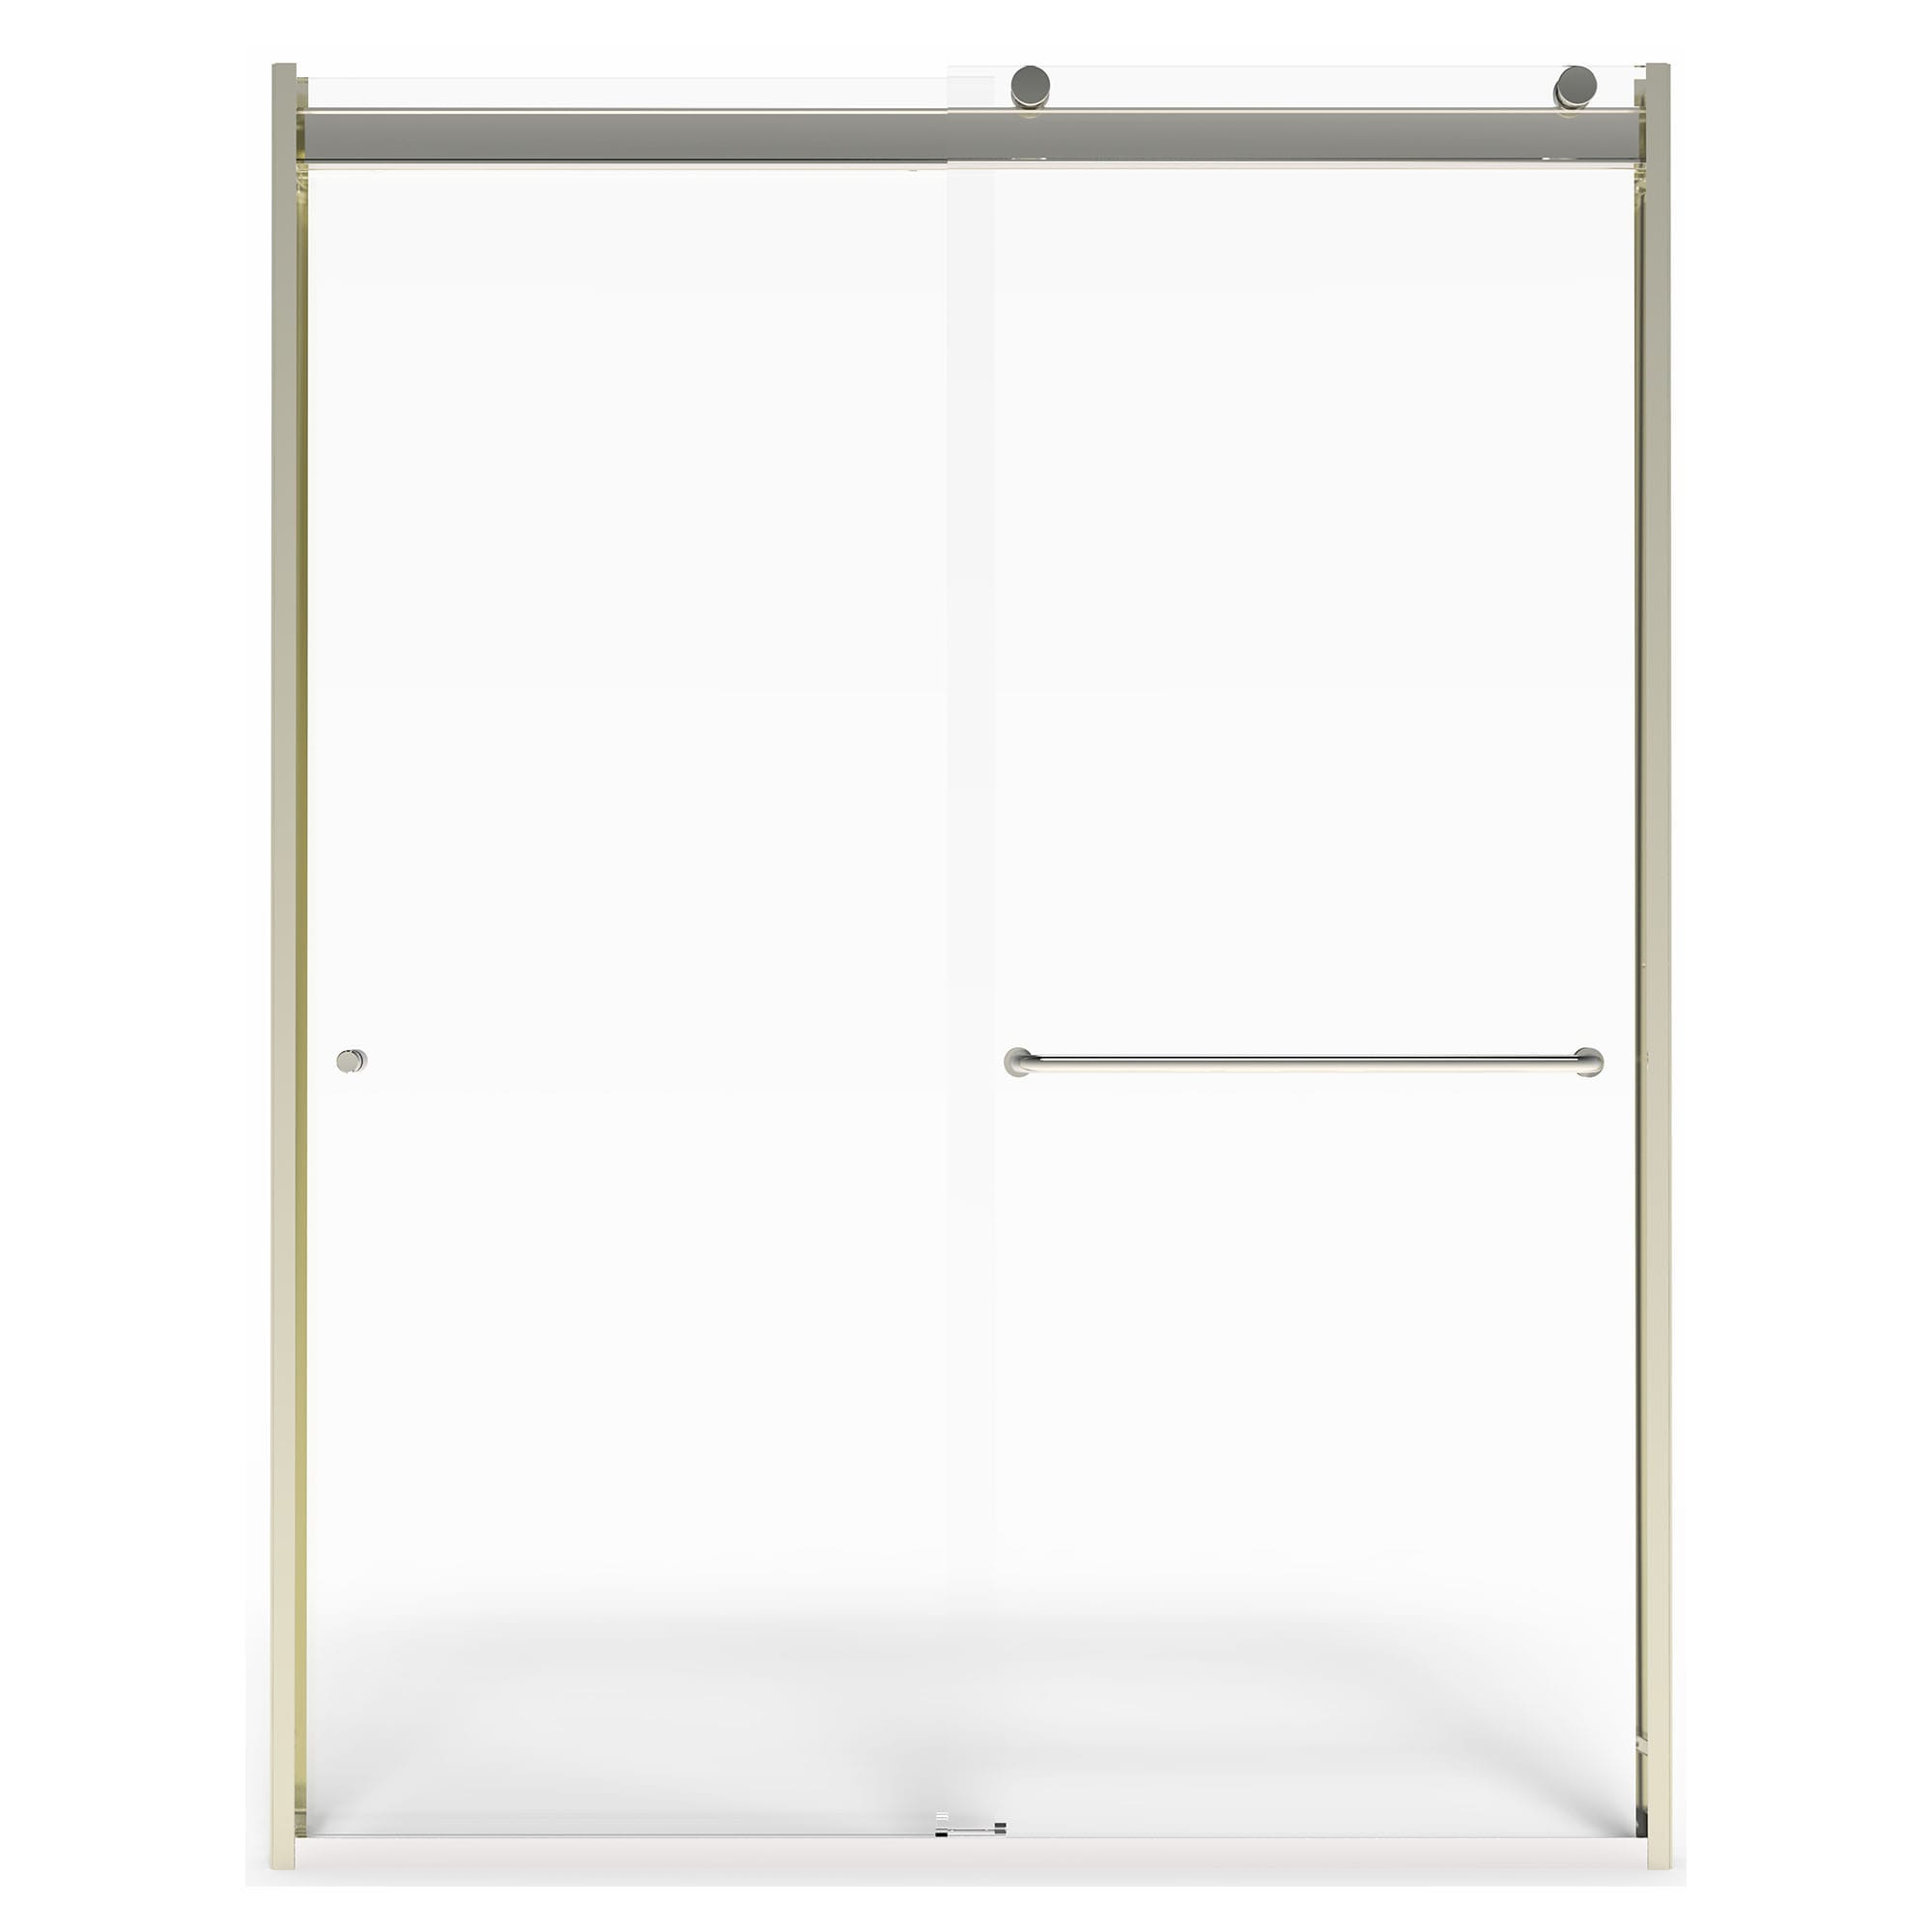 Brushed Nickel 56-in to 60-in x 70-in Semi-frameless Sliding Soft Close Shower Door | - American Standard AM00822400.006